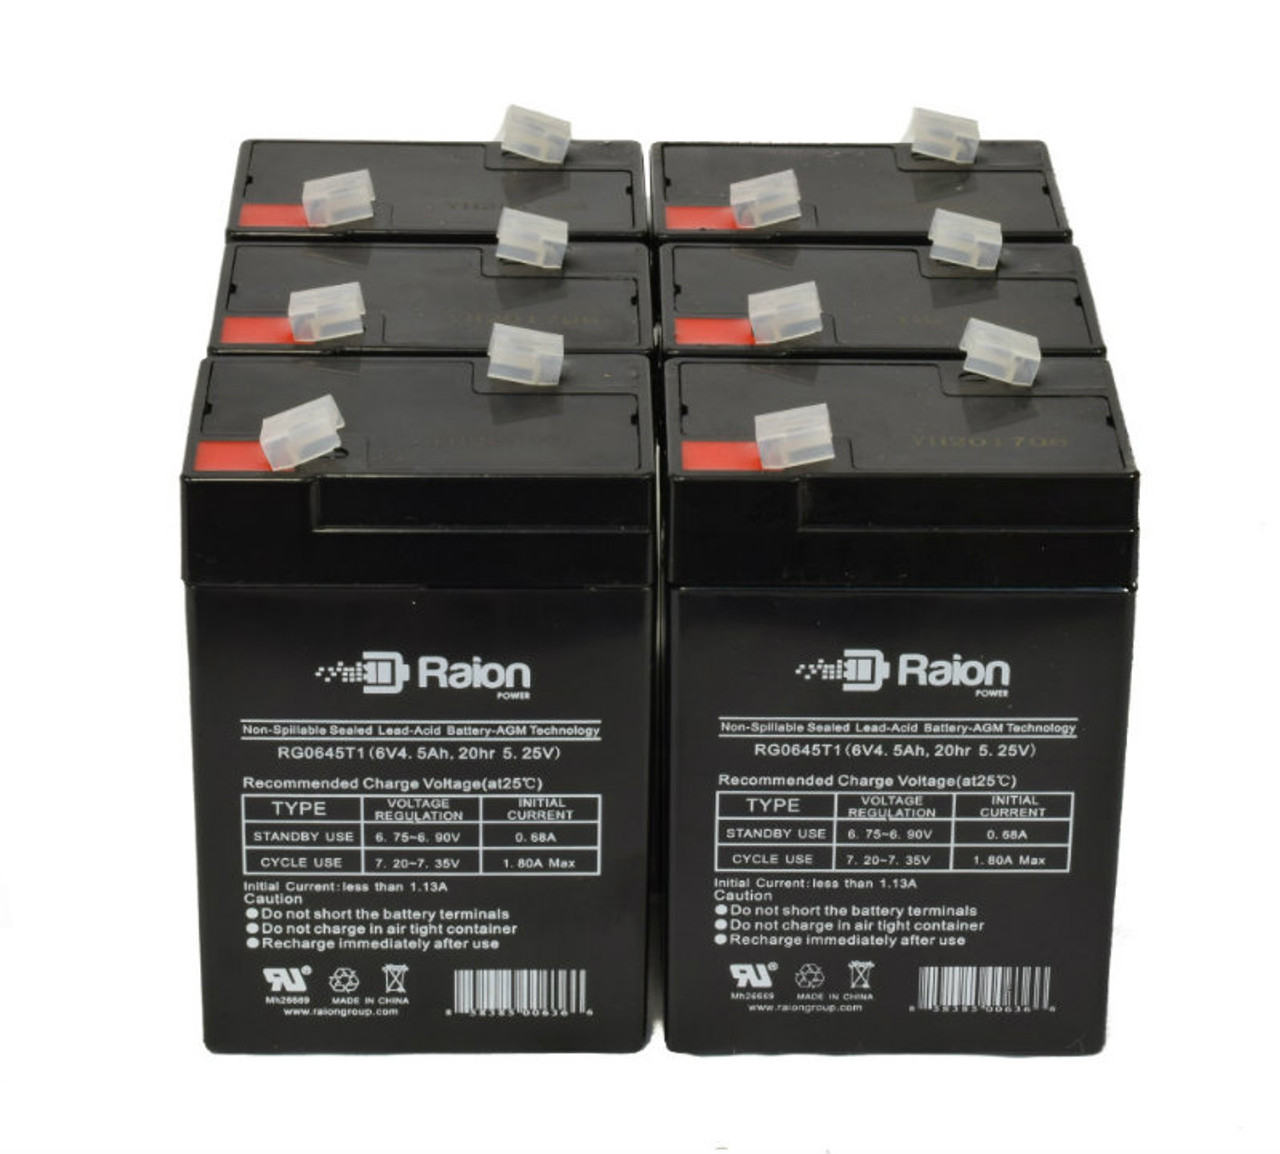 Raion Power 6 Volt 4.5Ah RG0645T1 Replacement Battery for CGB CB650 - 6 Pack